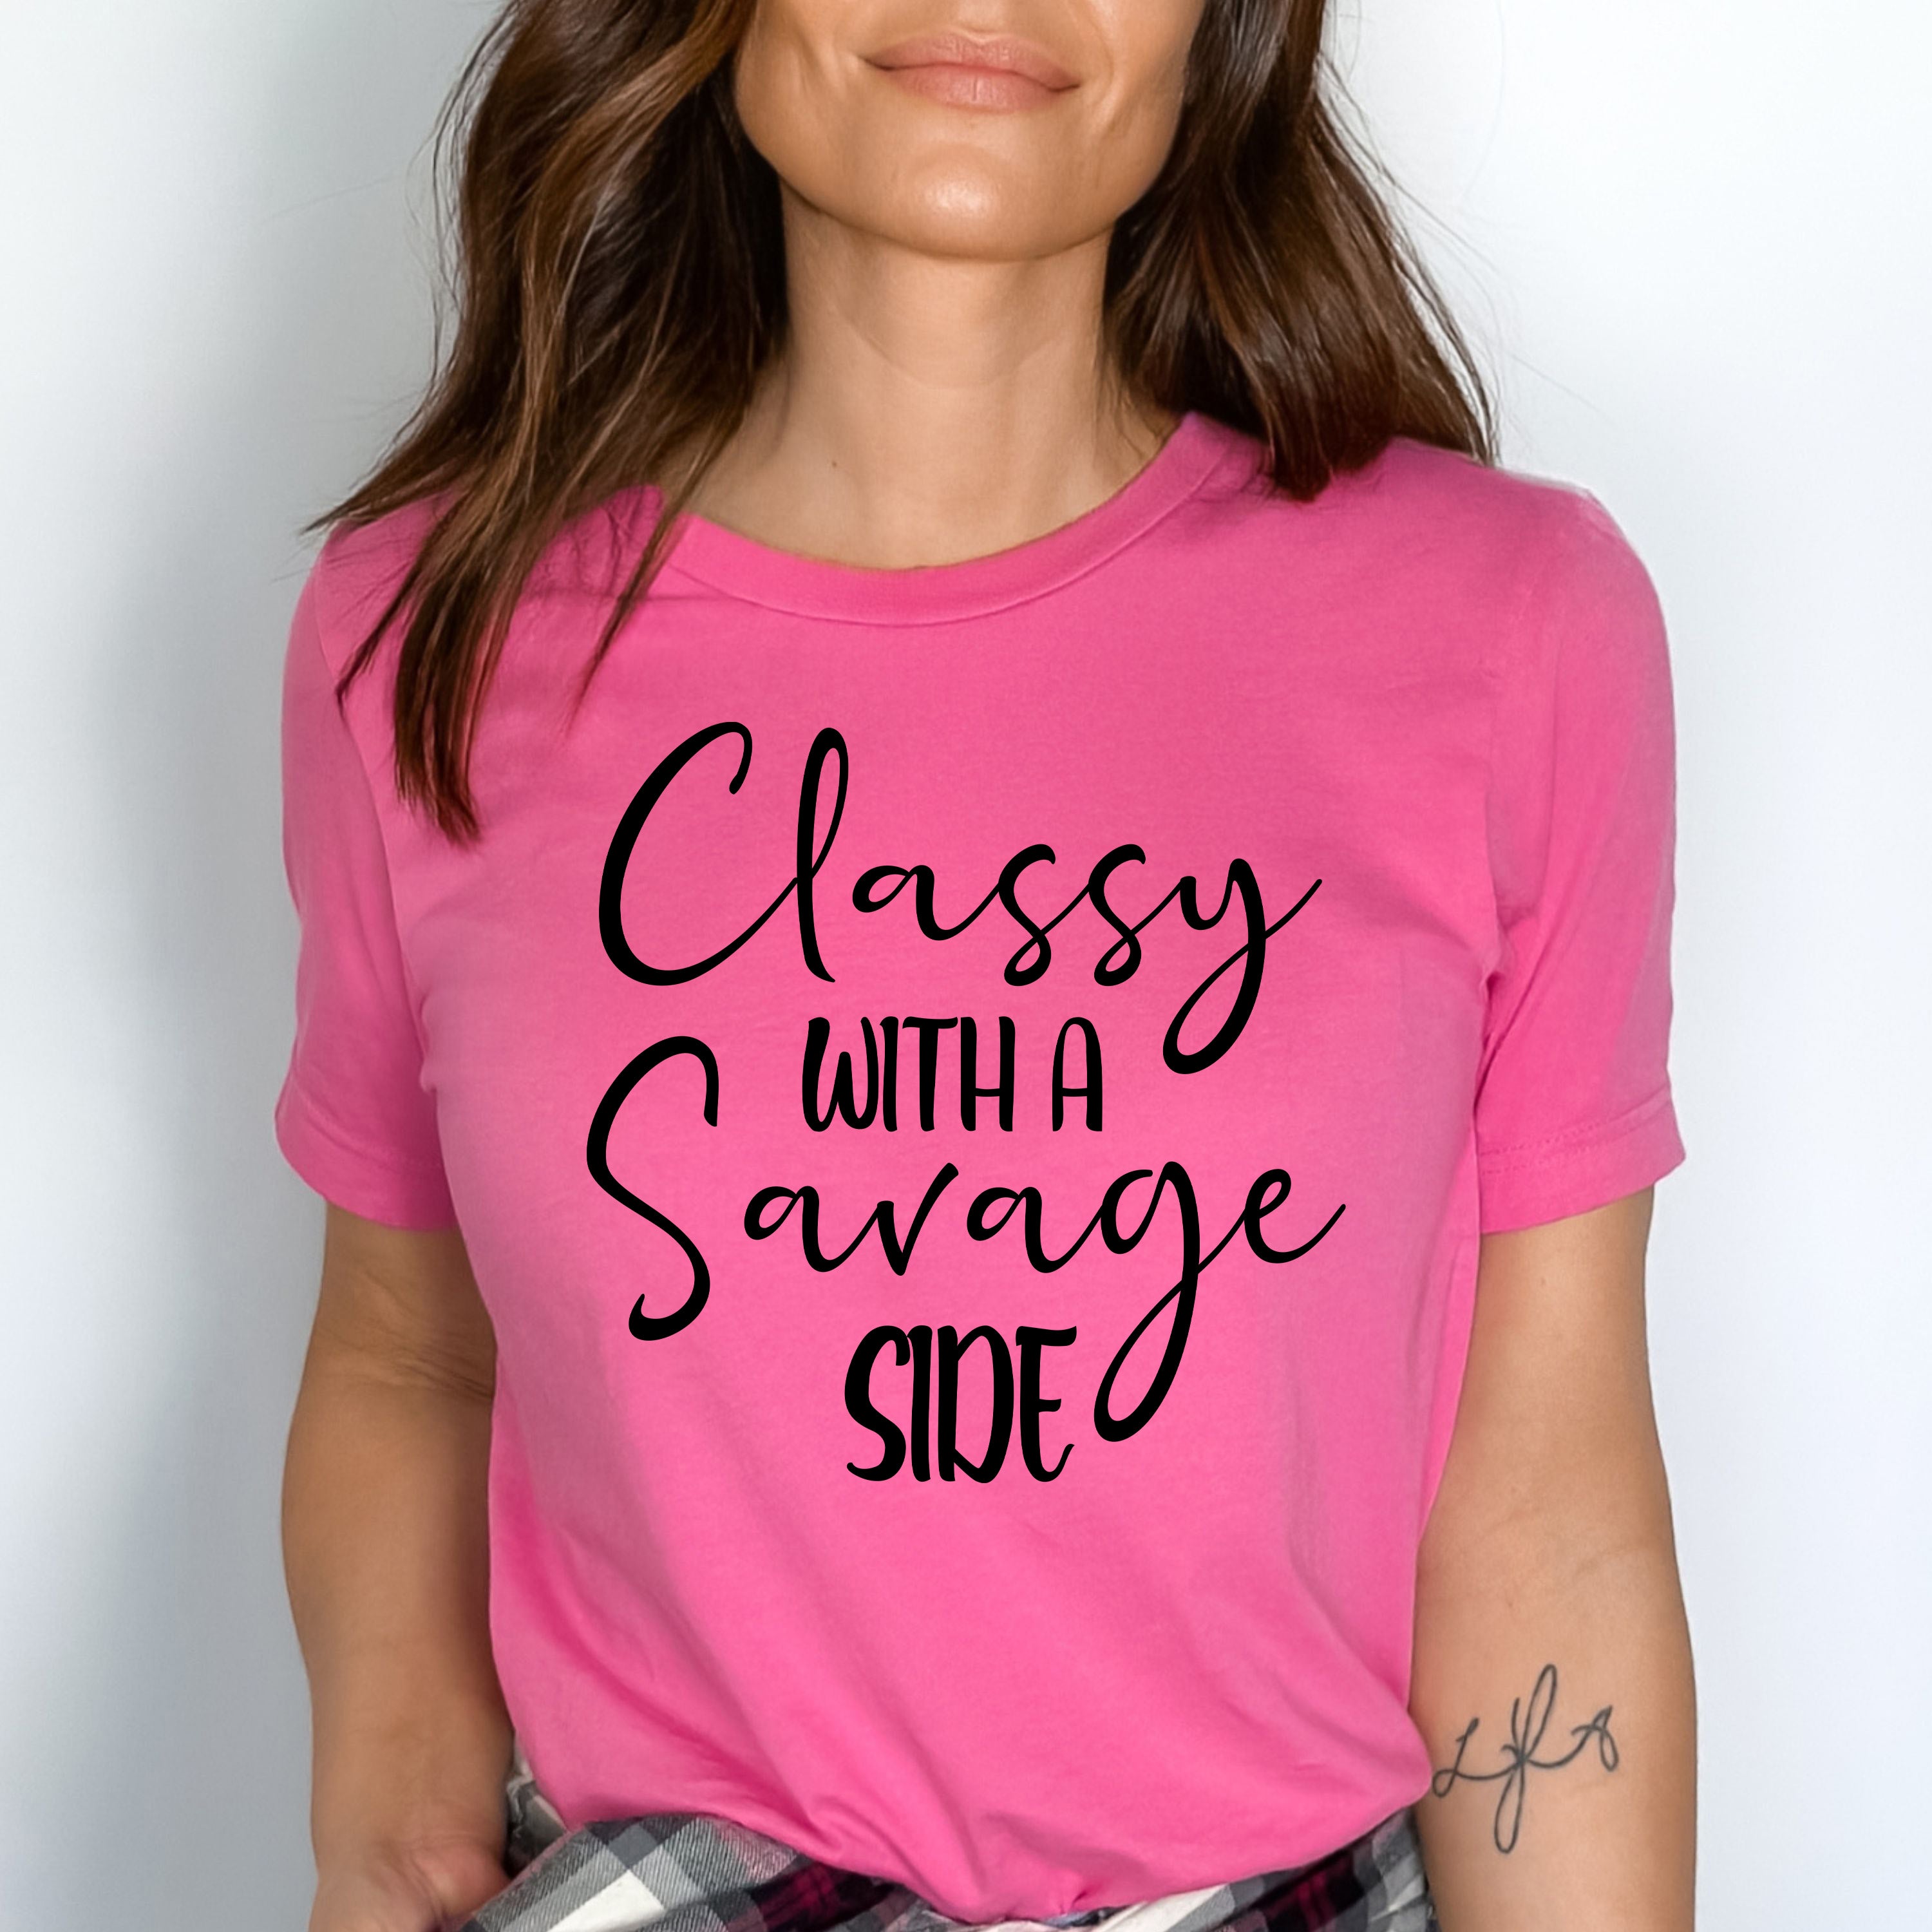 "CLASSY WITH THE SAVAGE SIDE/"